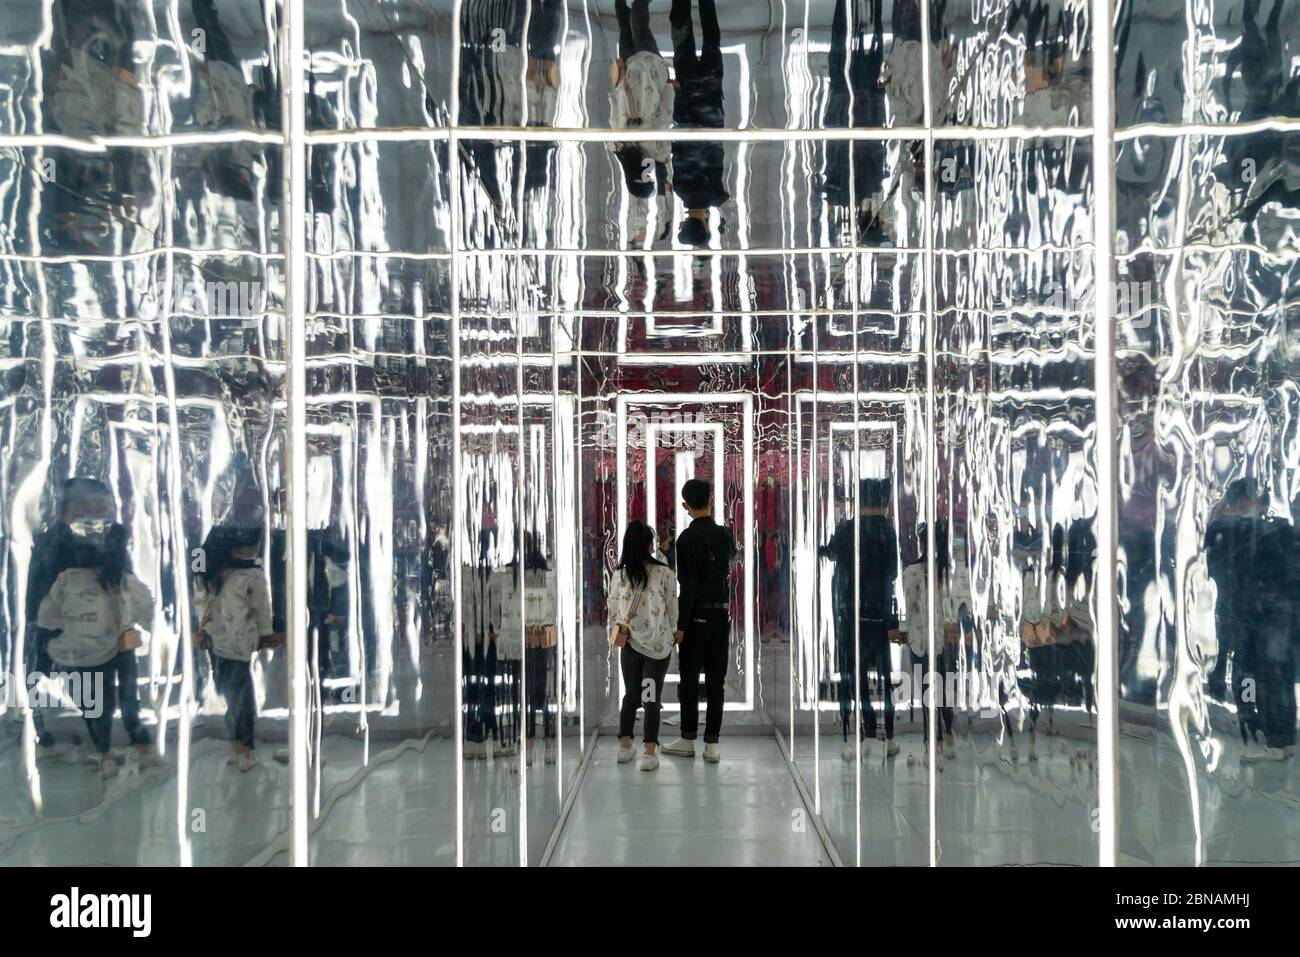 Shanghai, China. 13th May, 2020. May 13, 2020, Shanghai, into the nanjing road shopping mall of the star art museum, a number of cool installation scene dazzle. The exhibition hall USES a large number of mirror devices, combined with the arrangement of sound and light, to create stunning visual scenes and spatial effects, attracting many young people to punch in and take photos.(EDITORIAL USE ONLY. CHINA OUT) .It is understood that the whole sky museum covers an area of more than 500 square meters, a total of more than ten scenes, including breathing forest, super Credit: ZUMA Press, Inc./Alam Stock Photo